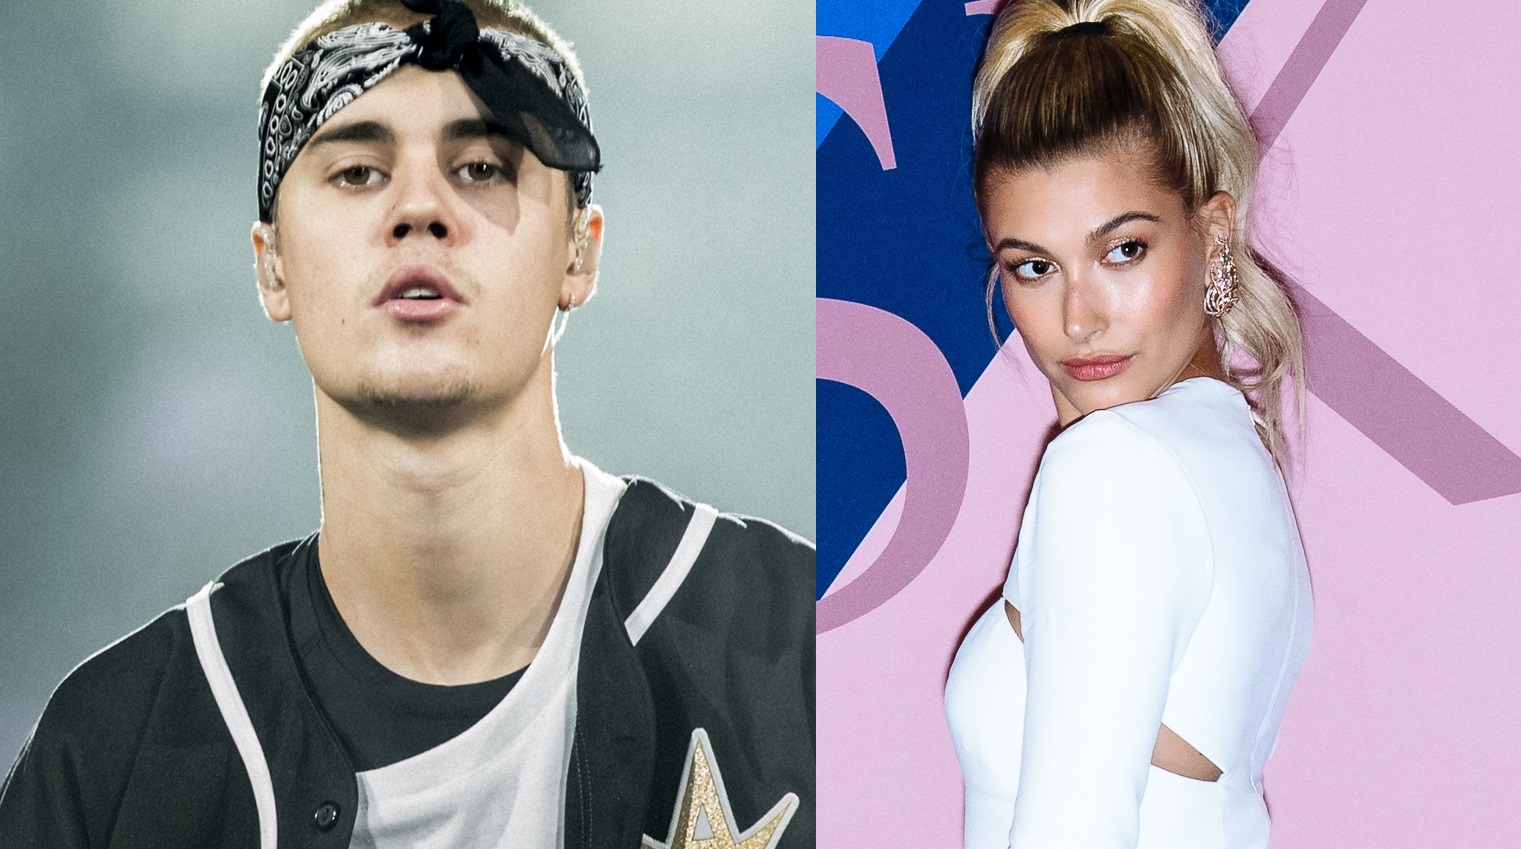 Justin Bieber, left, and Hailey Baldwin, right, announced they were engaged in early July 2018